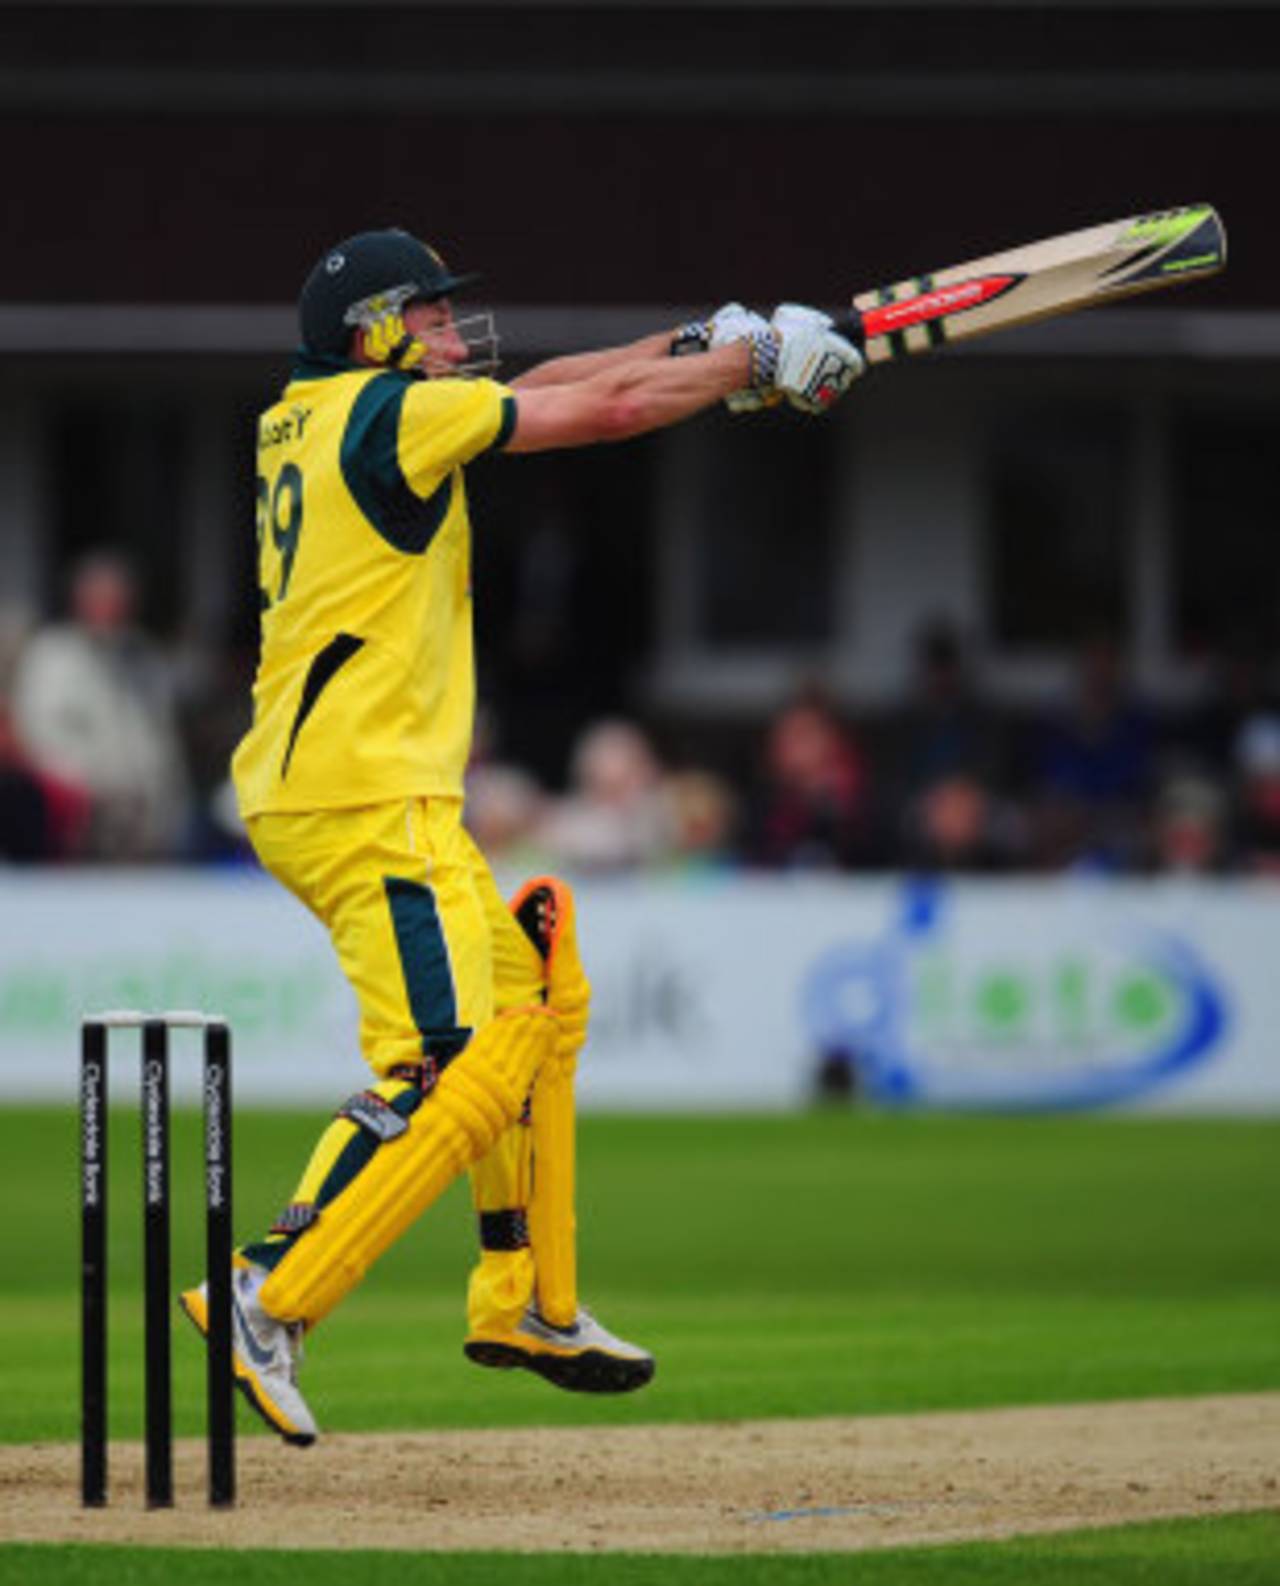 David Hussey made 37 from 25 balls, Leicestershire v Australians, Grace Road, June, 21, 2012